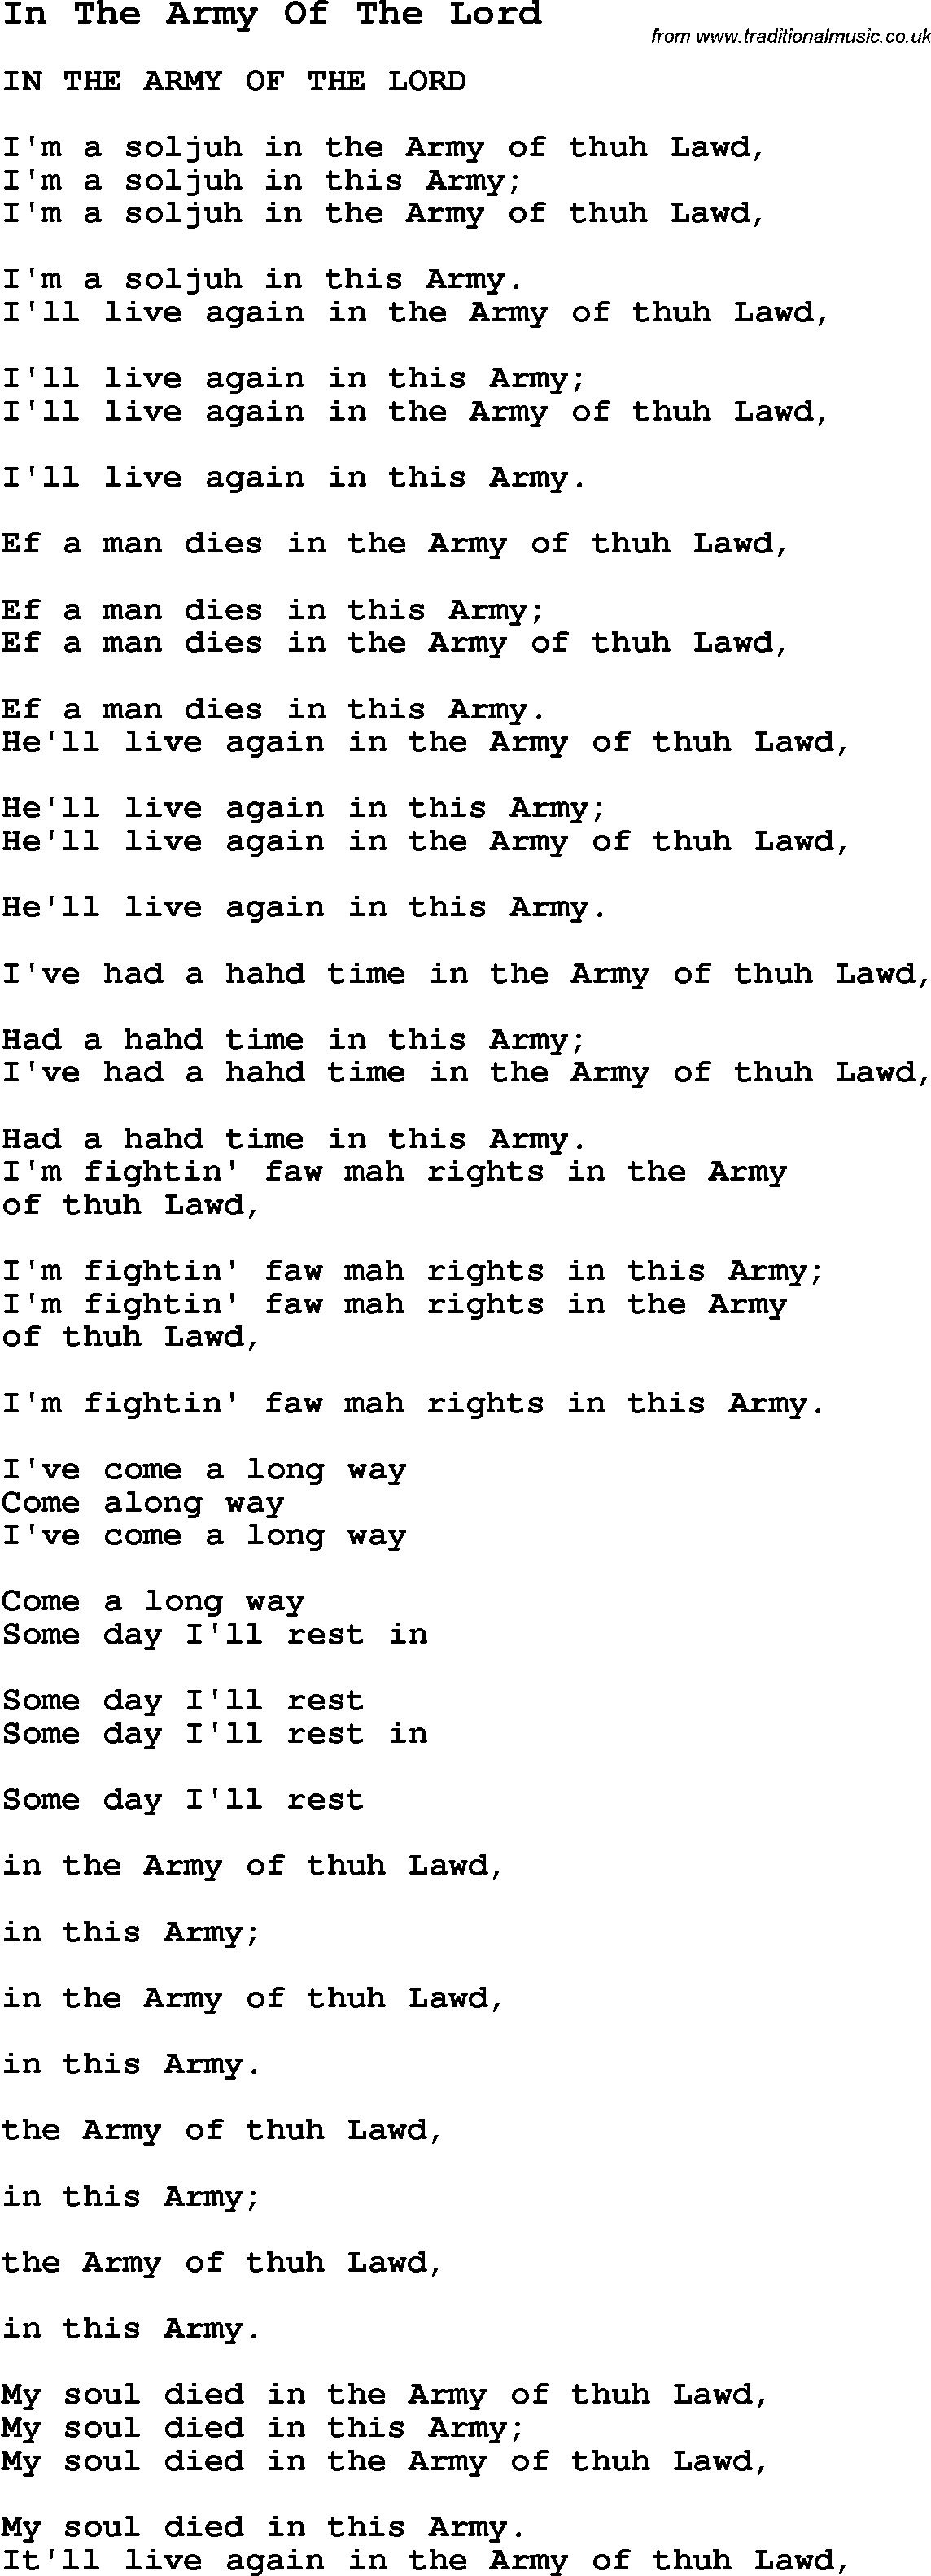 Negro Spiritual Song Lyrics for In The Army Of The Lord